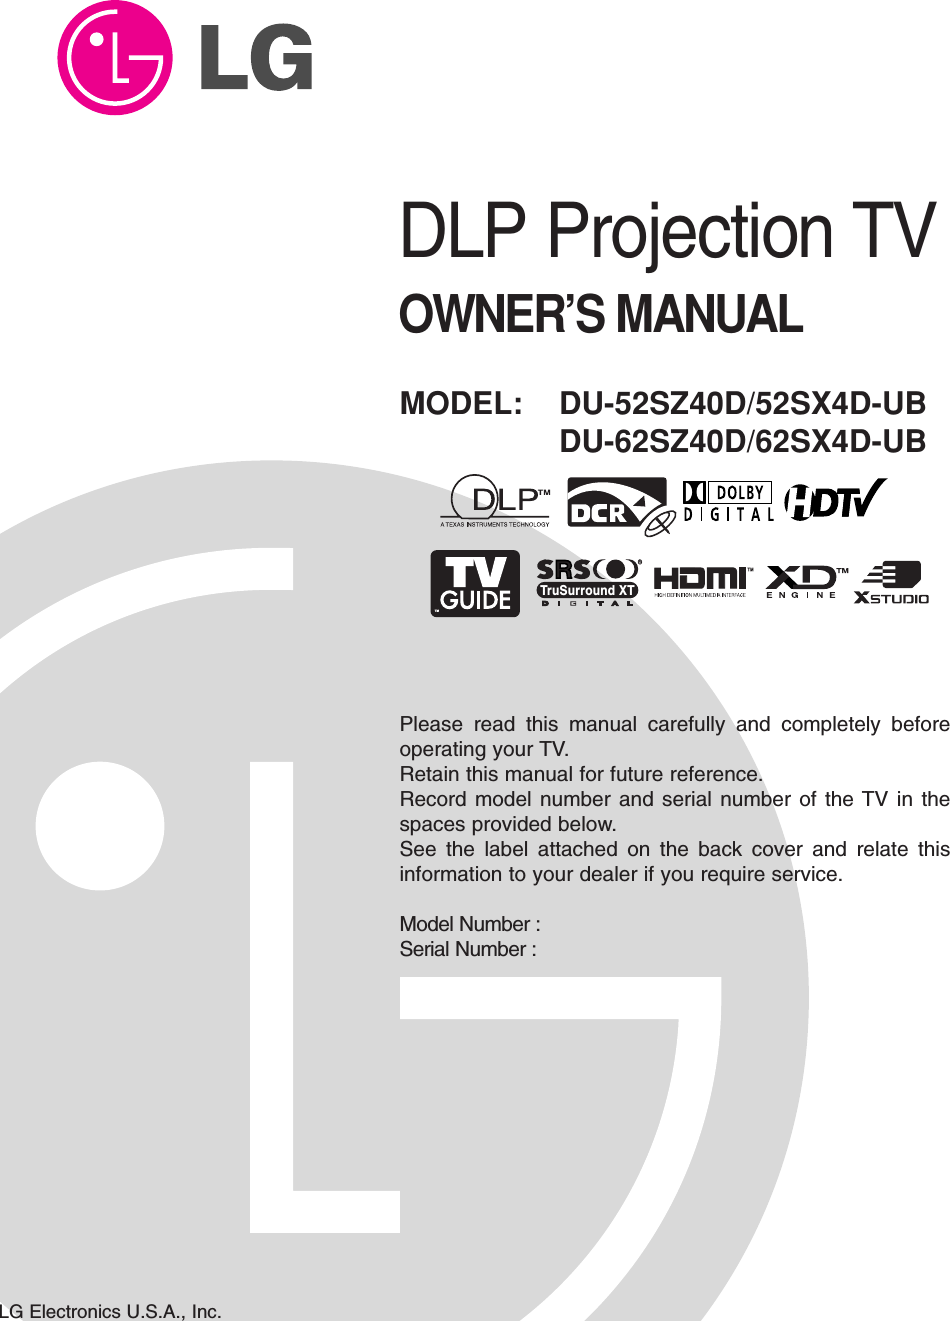 DLP Projection TVOWNER’S MANUALMODEL: DU-52SZ40D/52SX4D-UBDU-62SZ40D/62SX4D-UBLG Electronics U.S.A., Inc.TMRTruSurround XTPlease read this manual carefully and completely beforeoperating your TV. Retain this manual for future reference.Record model number and serial number of the TV in thespaces provided below. See the label attached on the back cover and relate thisinformation to your dealer if you require service.Model Number : Serial Number : 